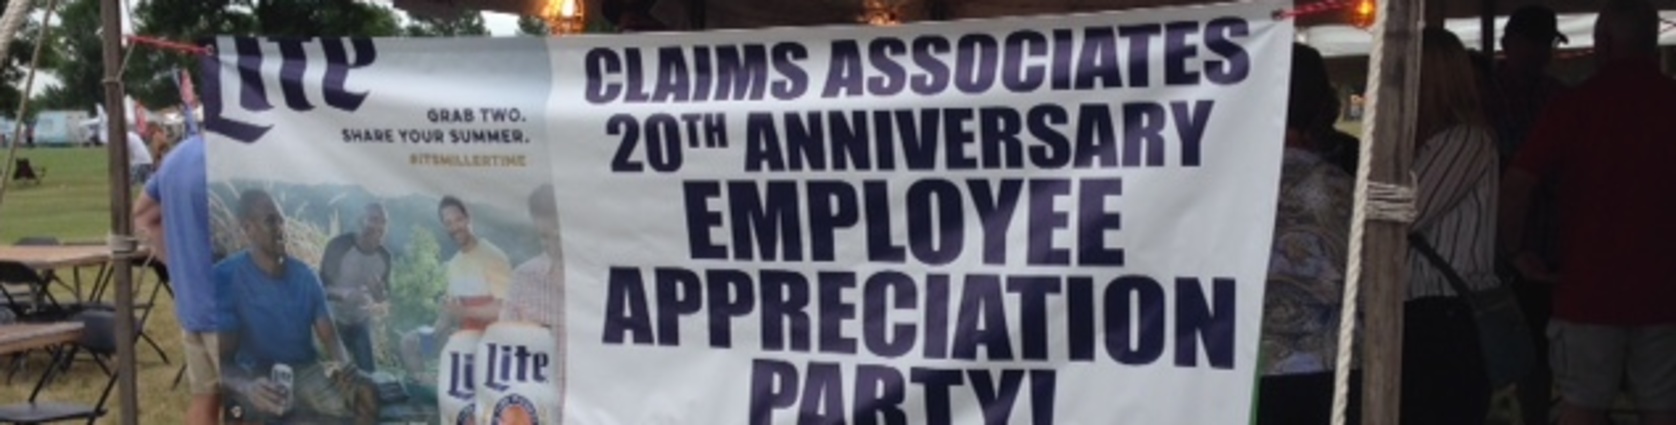 Claims Associates has Employee Appreciation party to celebrate 20 years at Jazzfest